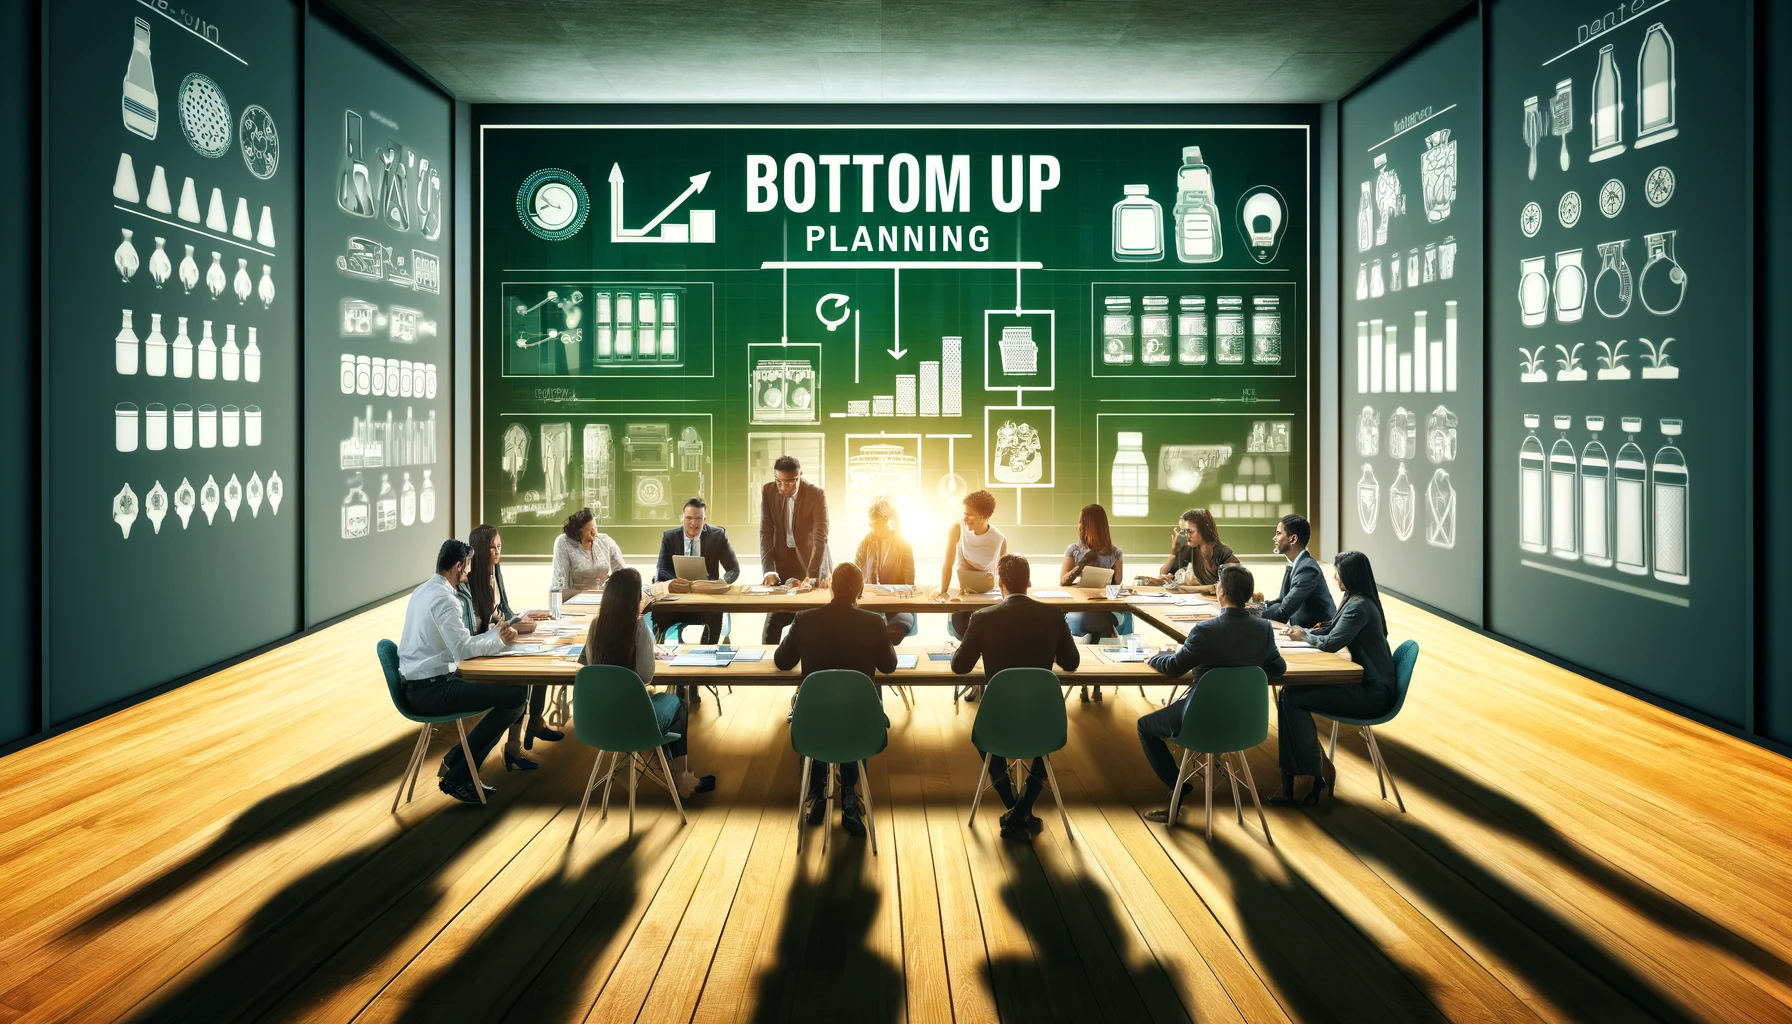 What are the advantages of Bottom-Up Planning for CPG?